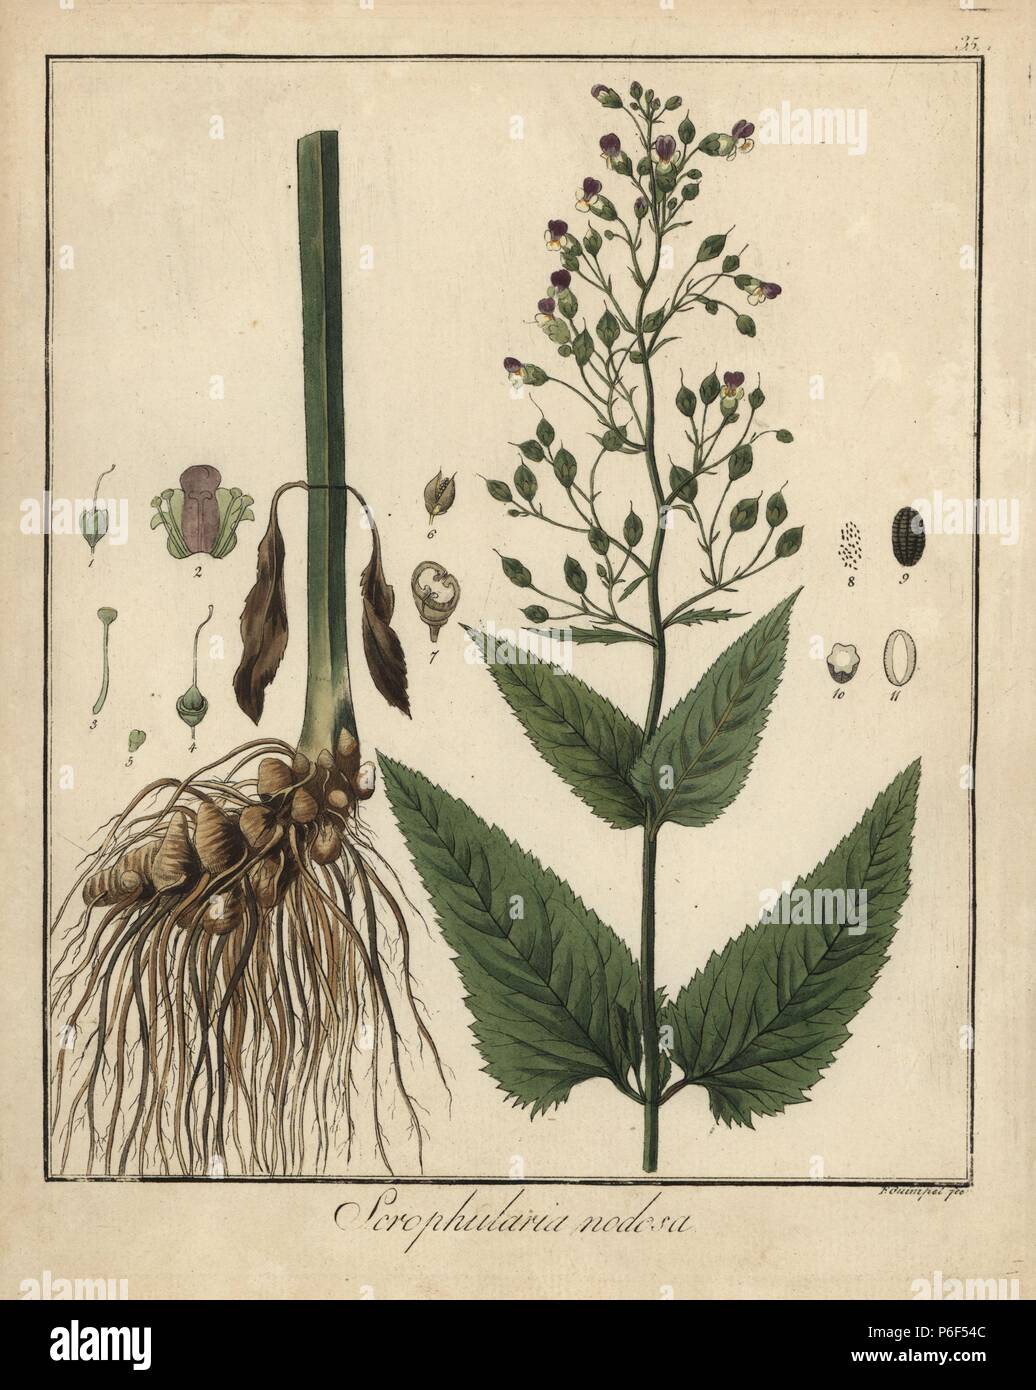 Figwort, Scrophularia nodosa. Handcoloured copperplate engraving by F. Guimpel from Dr. Friedrich Gottlob Hayne's Medical Botany, Berlin, 1822. Hayne (1763-1832) was a German botanist, apothecary and professor of pharmaceutical botany at Berlin University. Stock Photo